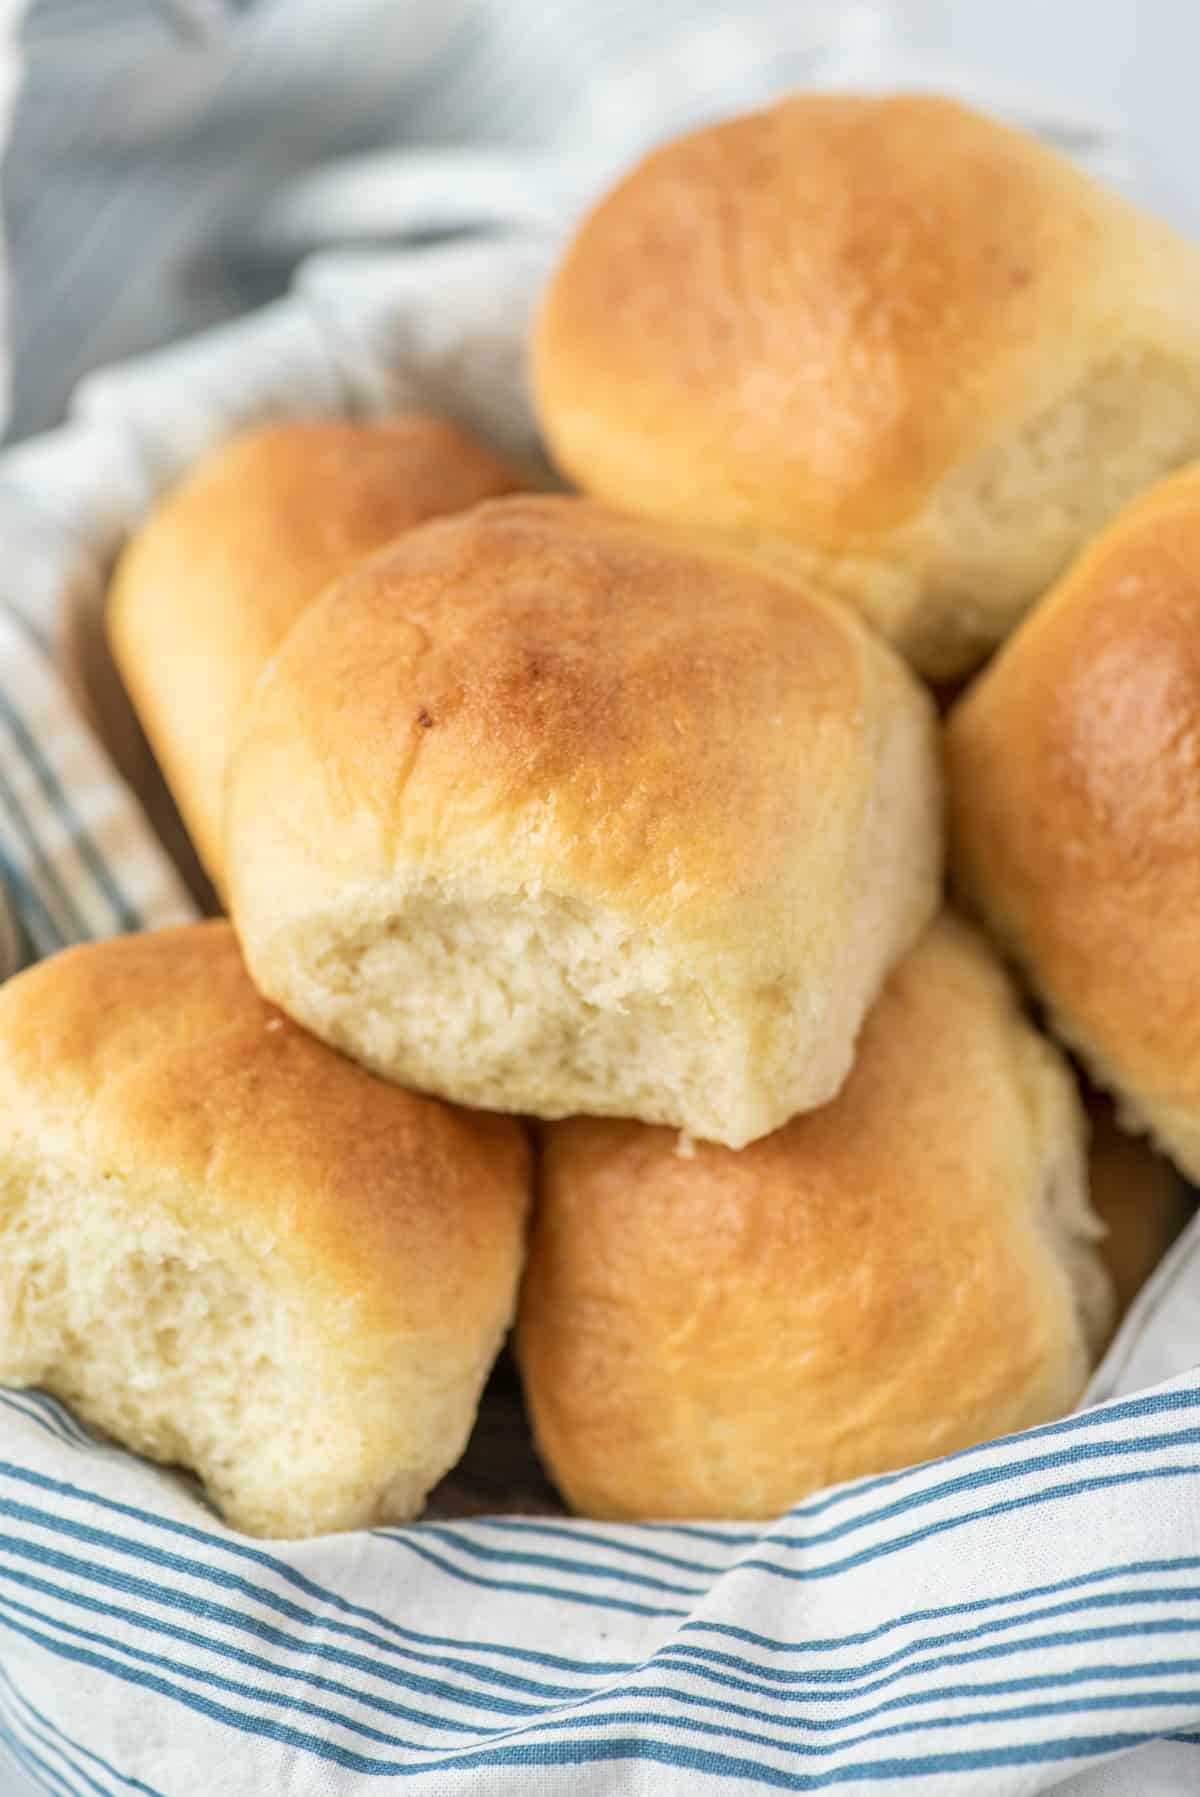 To Bake Better Homemade Bread & Rolls: Use a Thermometer!